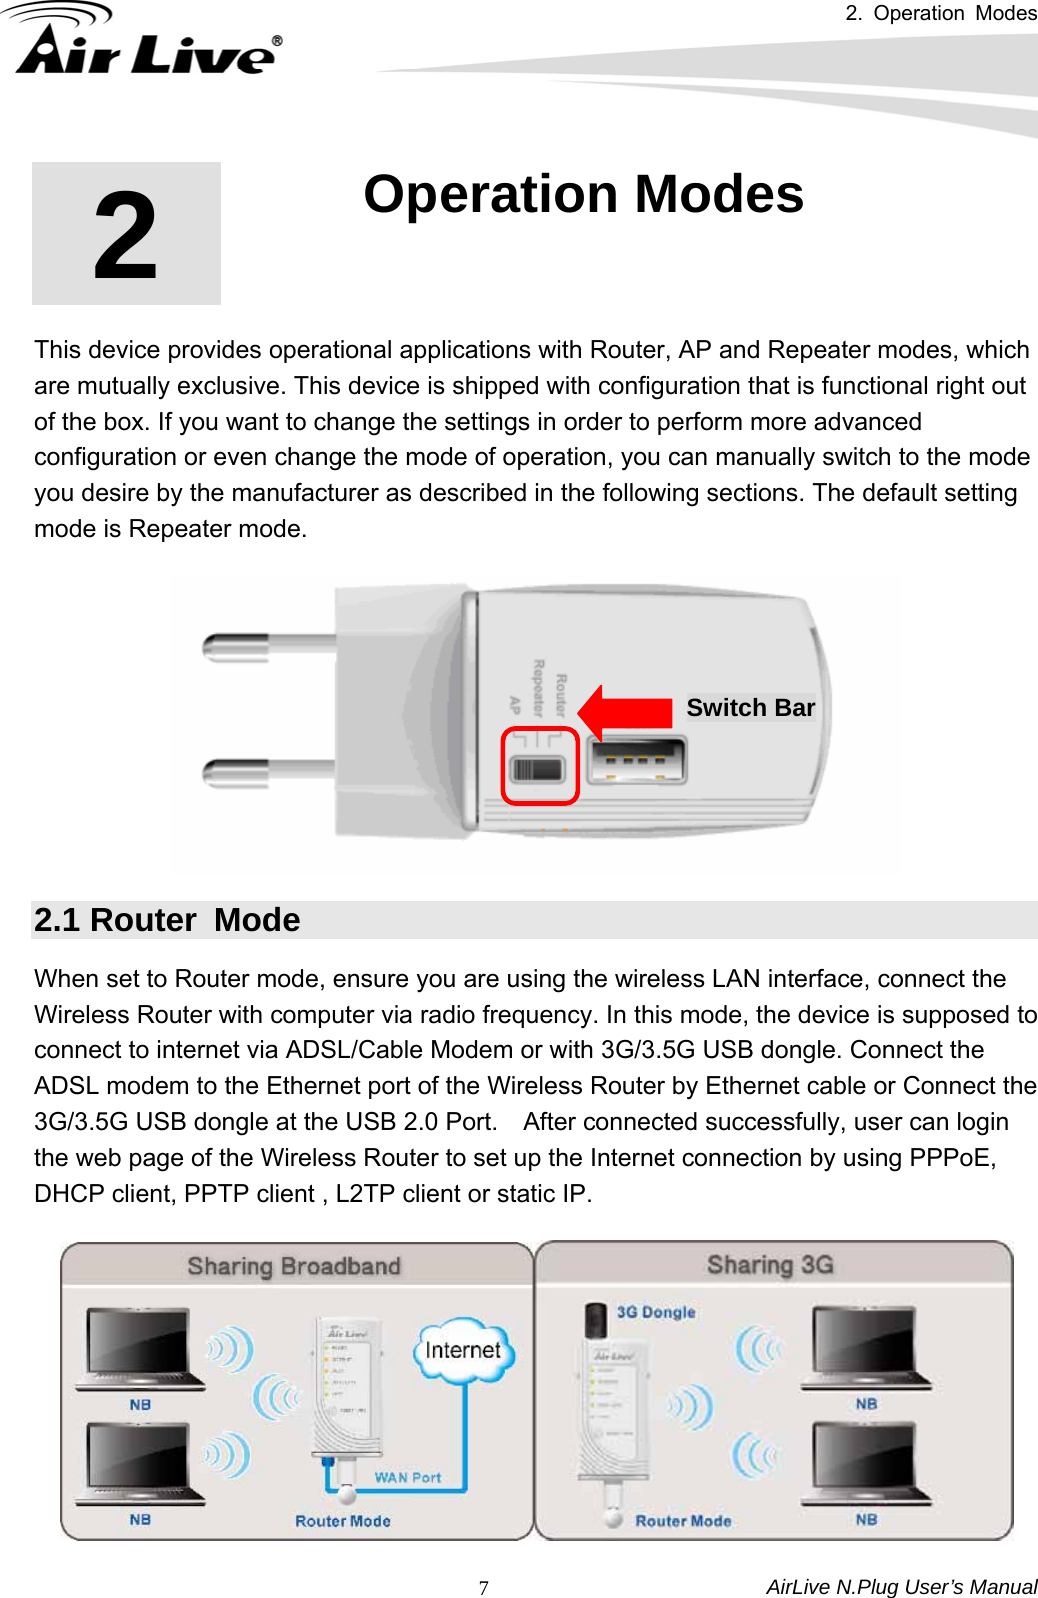 2. Operation Modes AirLive N.Plug User’s Manual  72  2. Operation Modes  This device provides operational applications with Router, AP and Repeater modes, which are mutually exclusive. This device is shipped with configuration that is functional right out of the box. If you want to change the settings in order to perform more advanced configuration or even change the mode of operation, you can manually switch to the mode you desire by the manufacturer as described in the following sections. The default setting mode is Repeater mode.  Switch Bar 2.1 Router  Mode When set to Router mode, ensure you are using the wireless LAN interface, connect the Wireless Router with computer via radio frequency. In this mode, the device is supposed to connect to internet via ADSL/Cable Modem or with 3G/3.5G USB dongle. Connect the ADSL modem to the Ethernet port of the Wireless Router by Ethernet cable or Connect the 3G/3.5G USB dongle at the USB 2.0 Port.    After connected successfully, user can login the web page of the Wireless Router to set up the Internet connection by using PPPoE, DHCP client, PPTP client , L2TP client or static IP.  